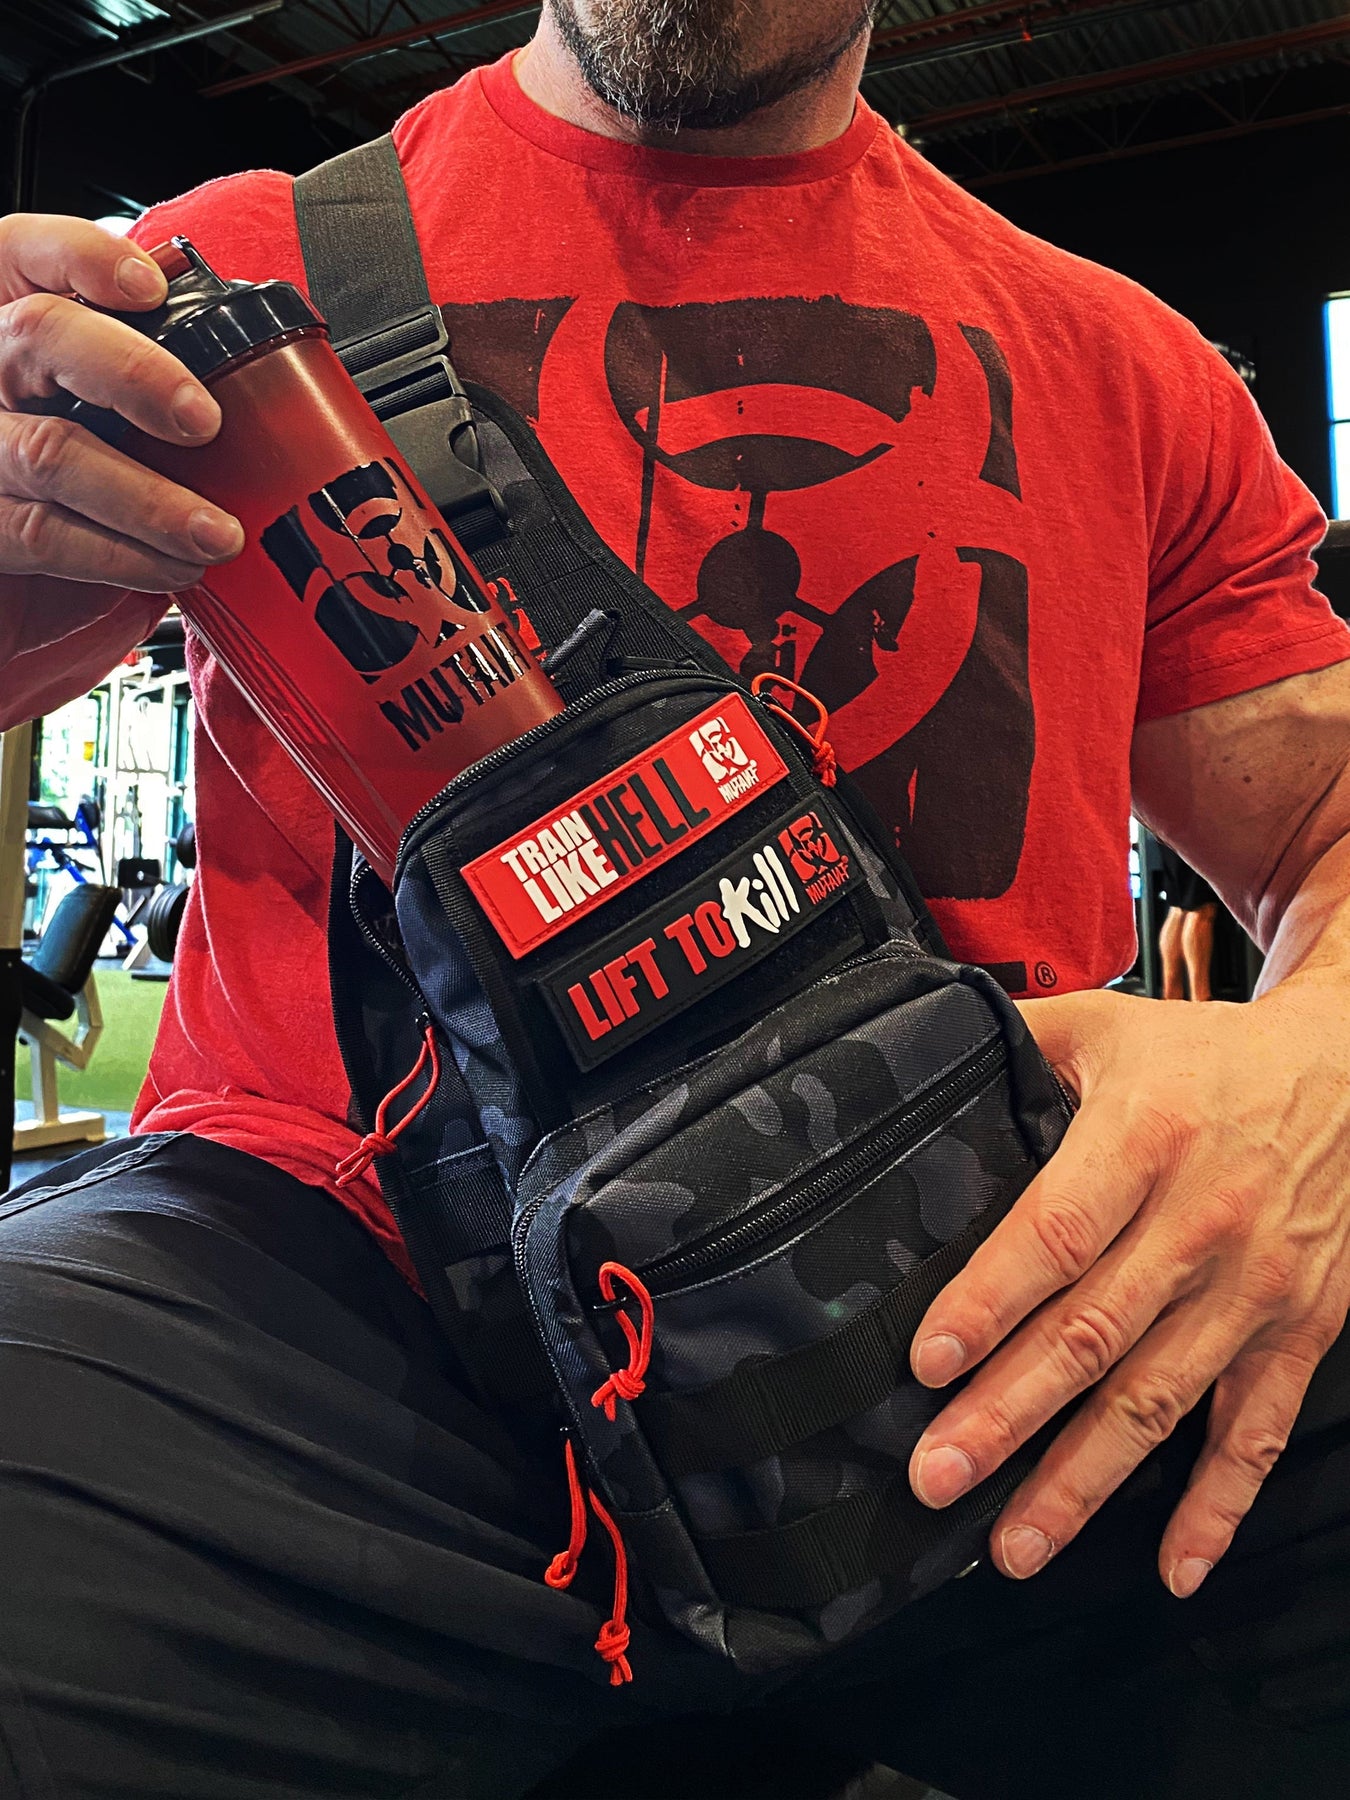 MUTANT® TRAIN LIKE HELL Velcro Patch - Fuel Your Fire to Lift! - MUTANT